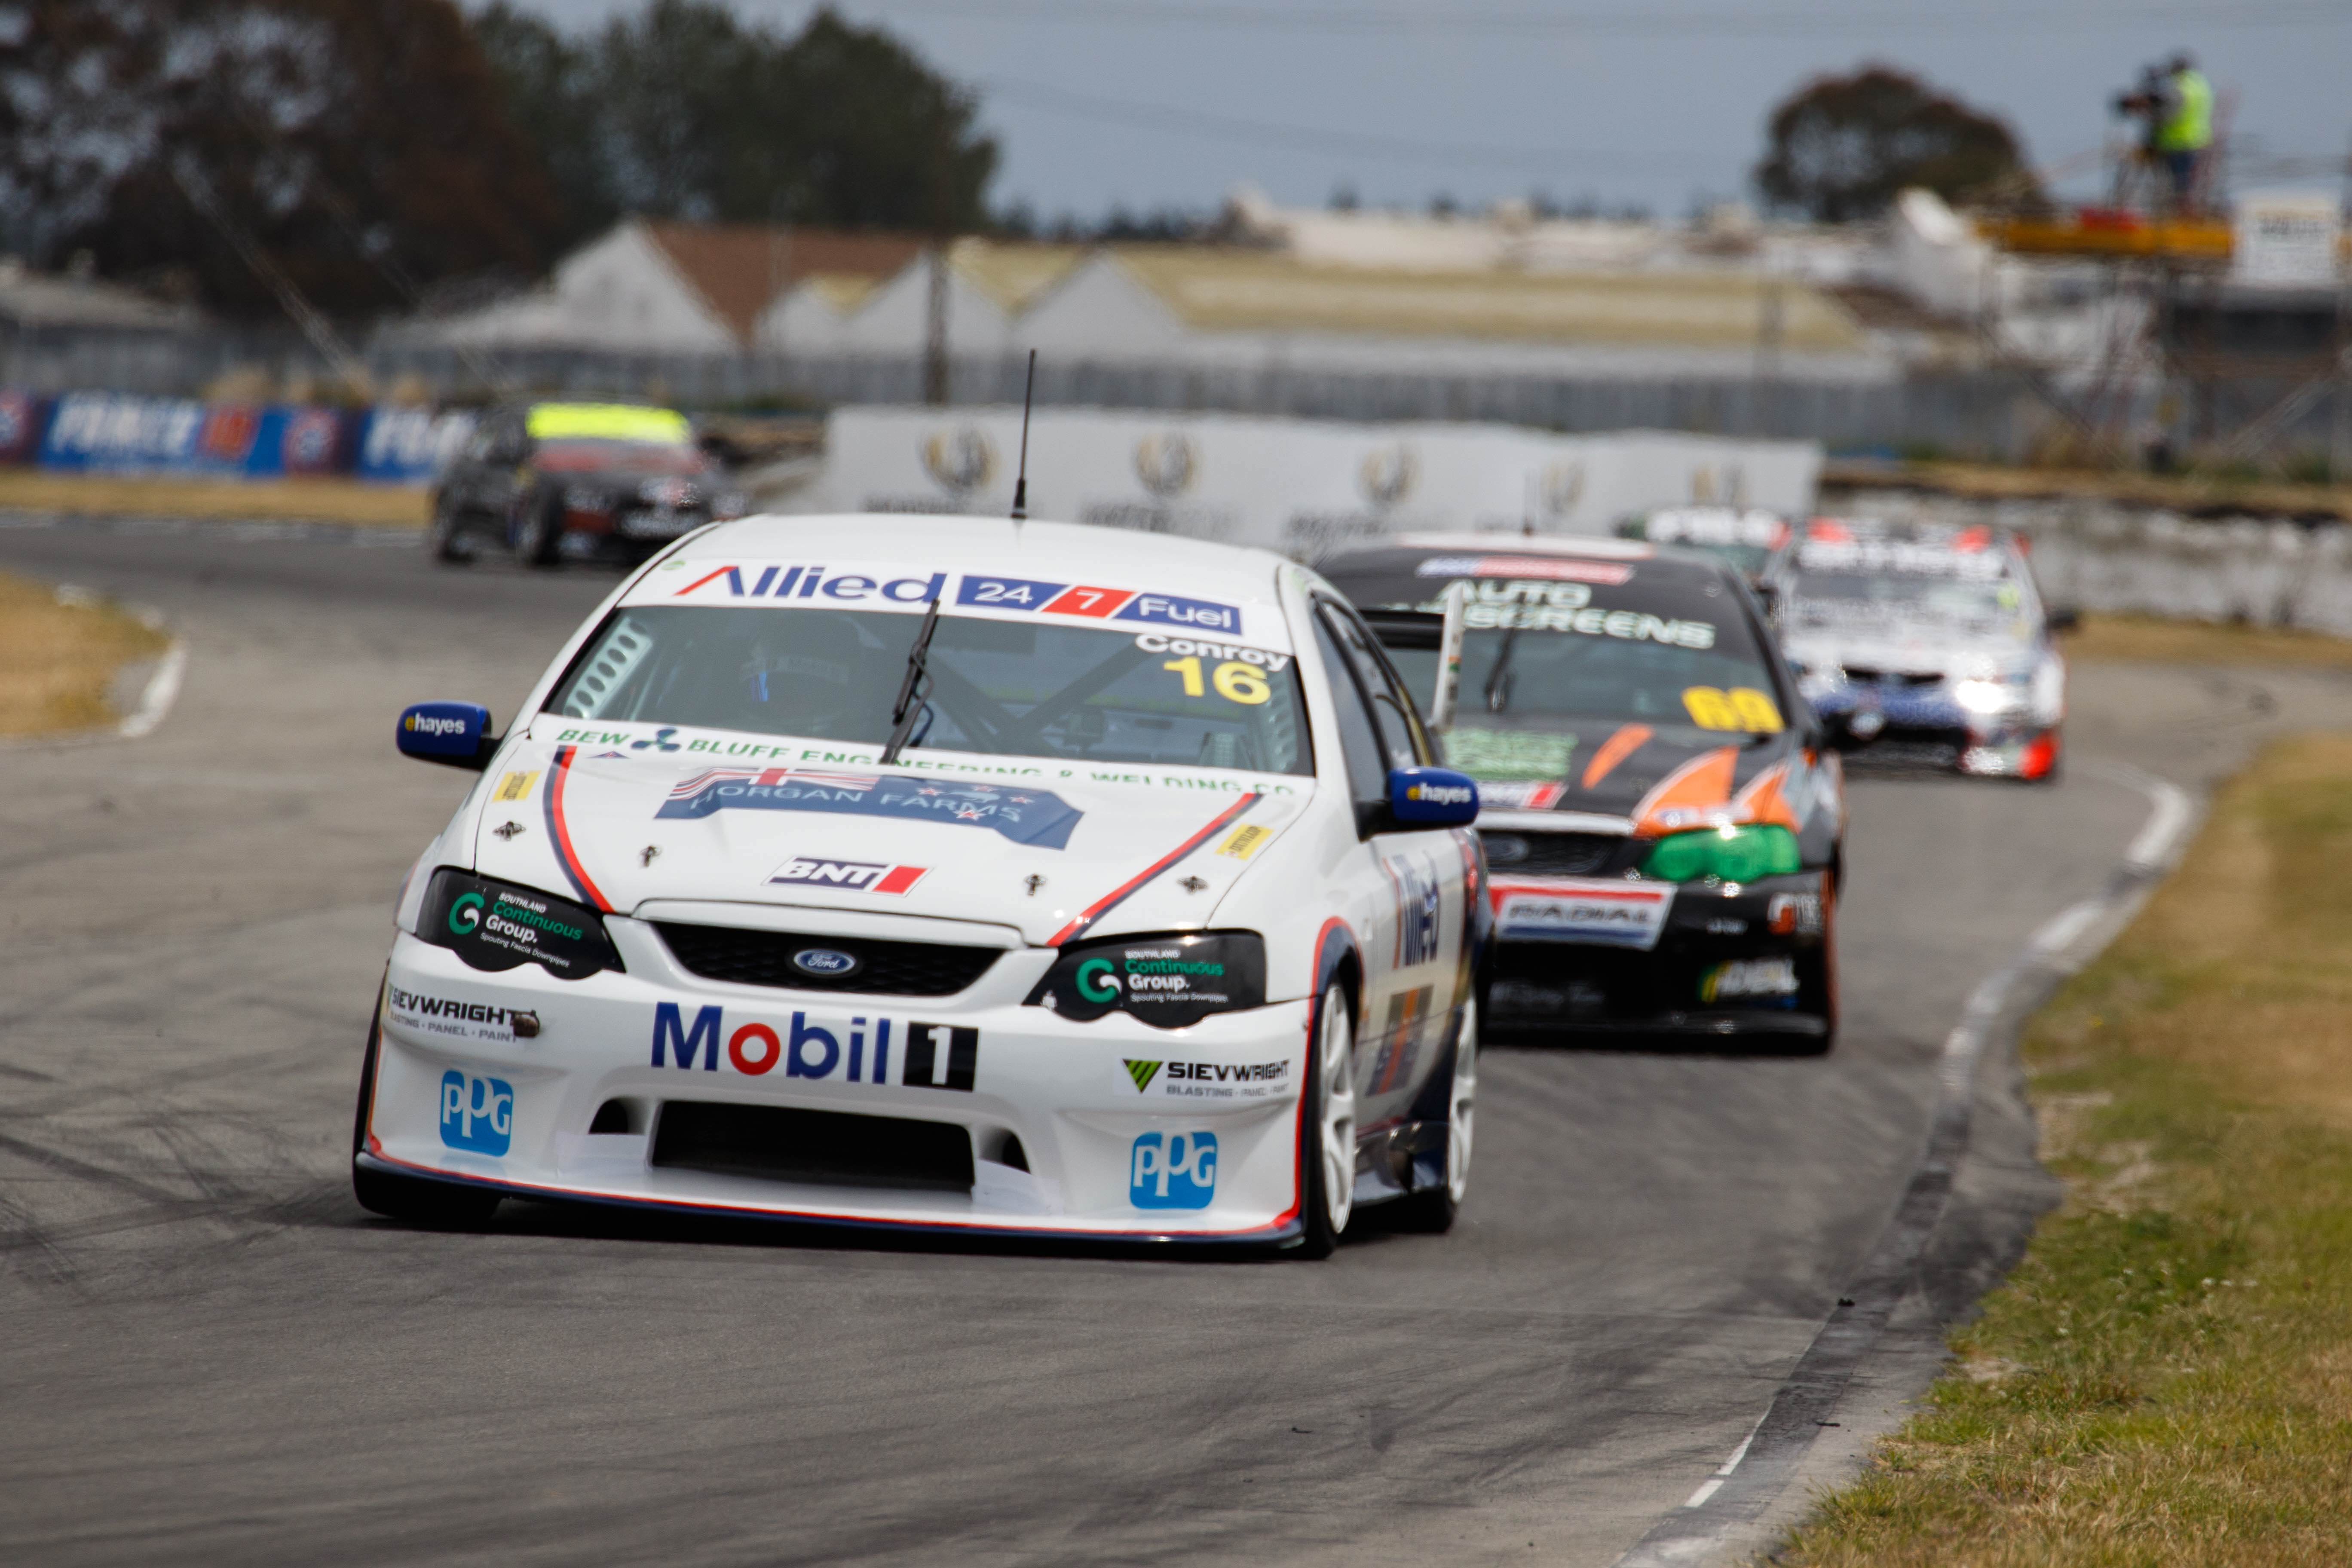 Wet weekend in store for NZ Touring Cars at Teretonga